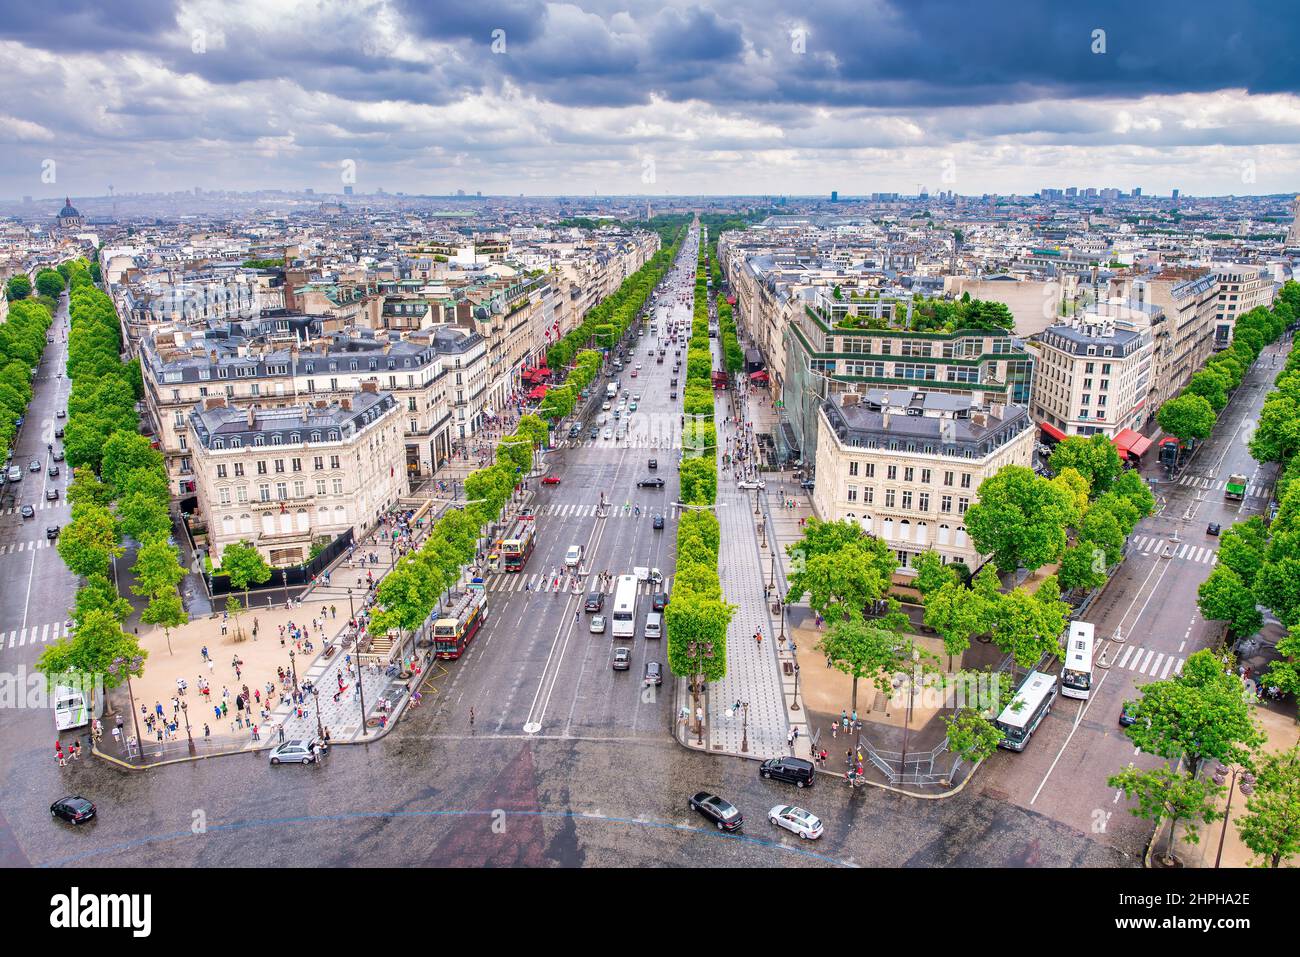 Paris, France - July 20, 2014: Aerial view of city streets from the top of Triumph Arch Stock Photo